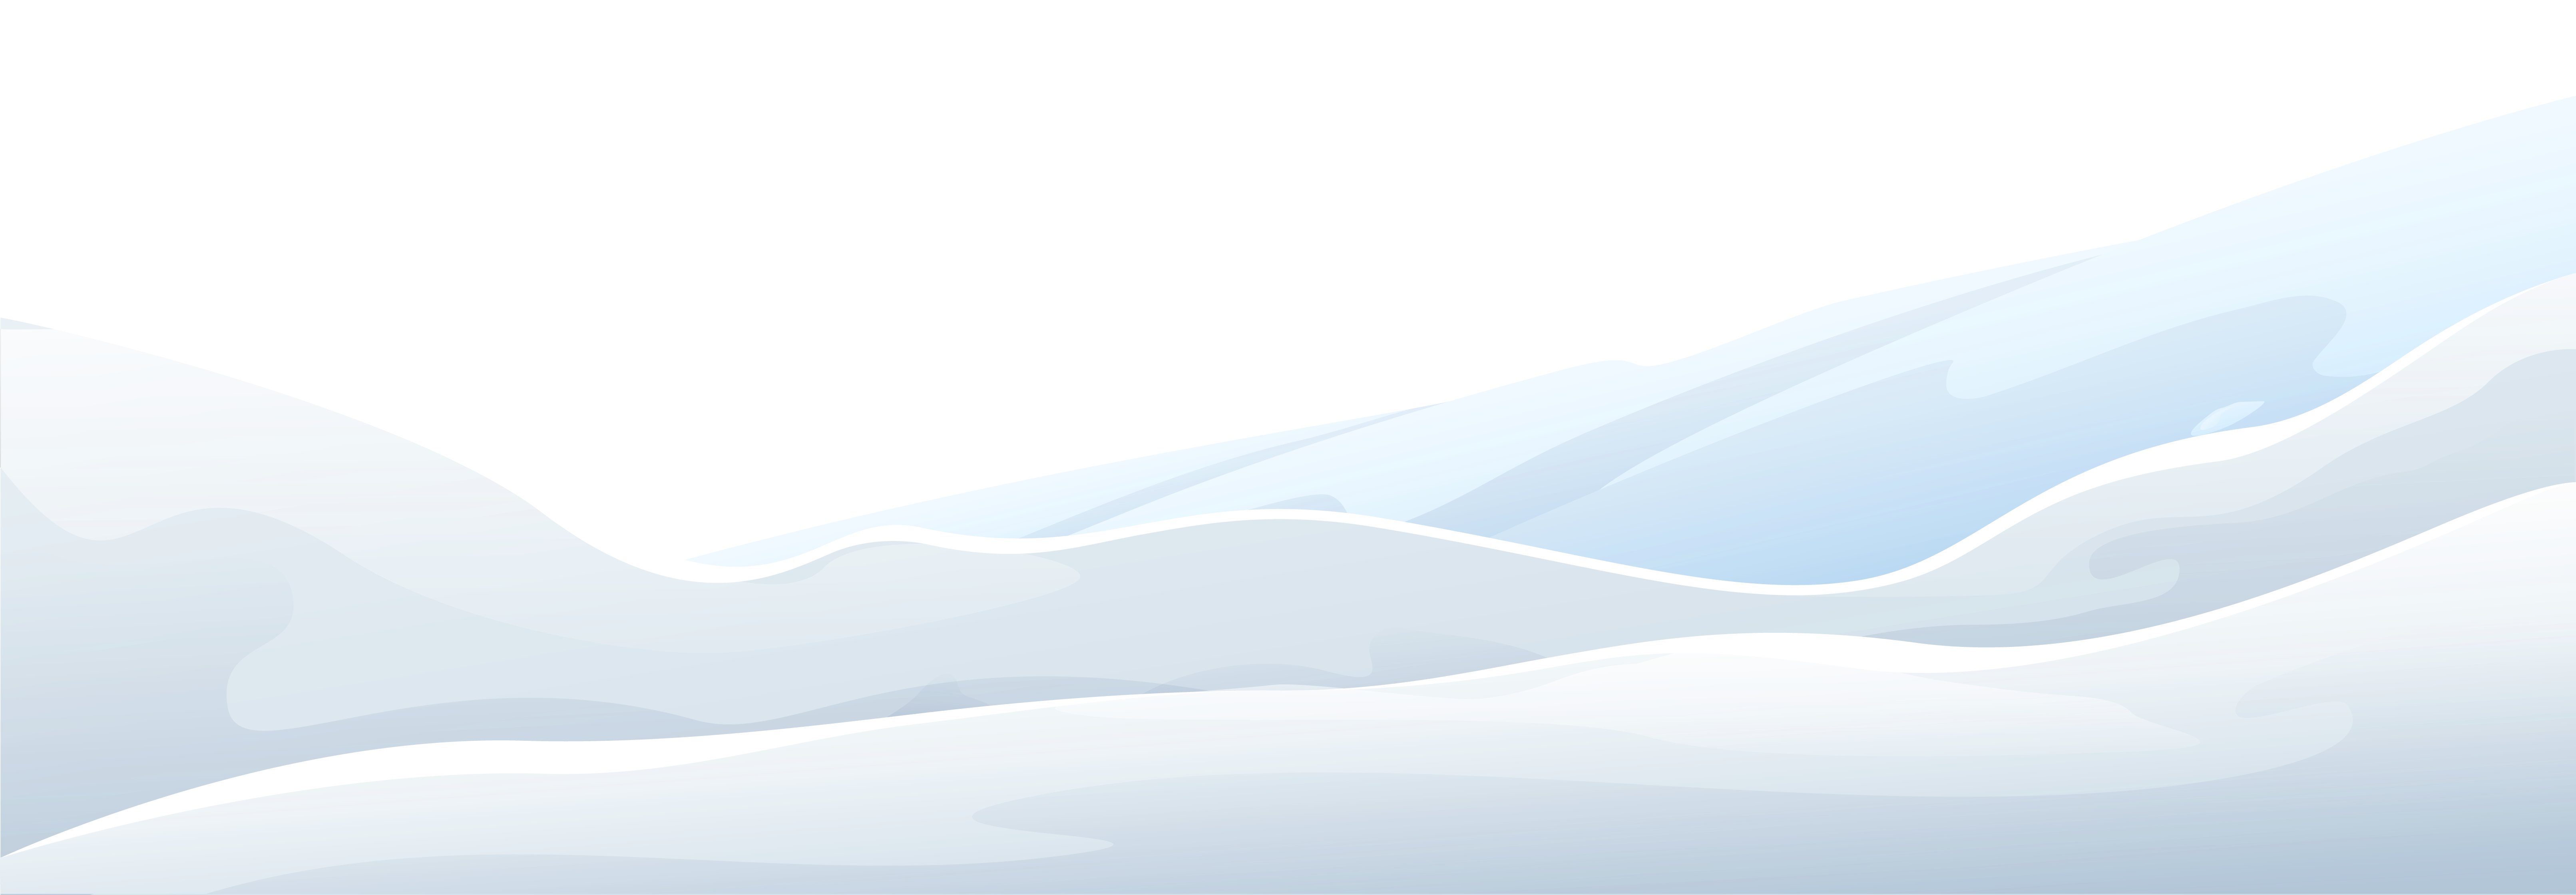 Blizzard clipart snow ground. Winter png image gallery